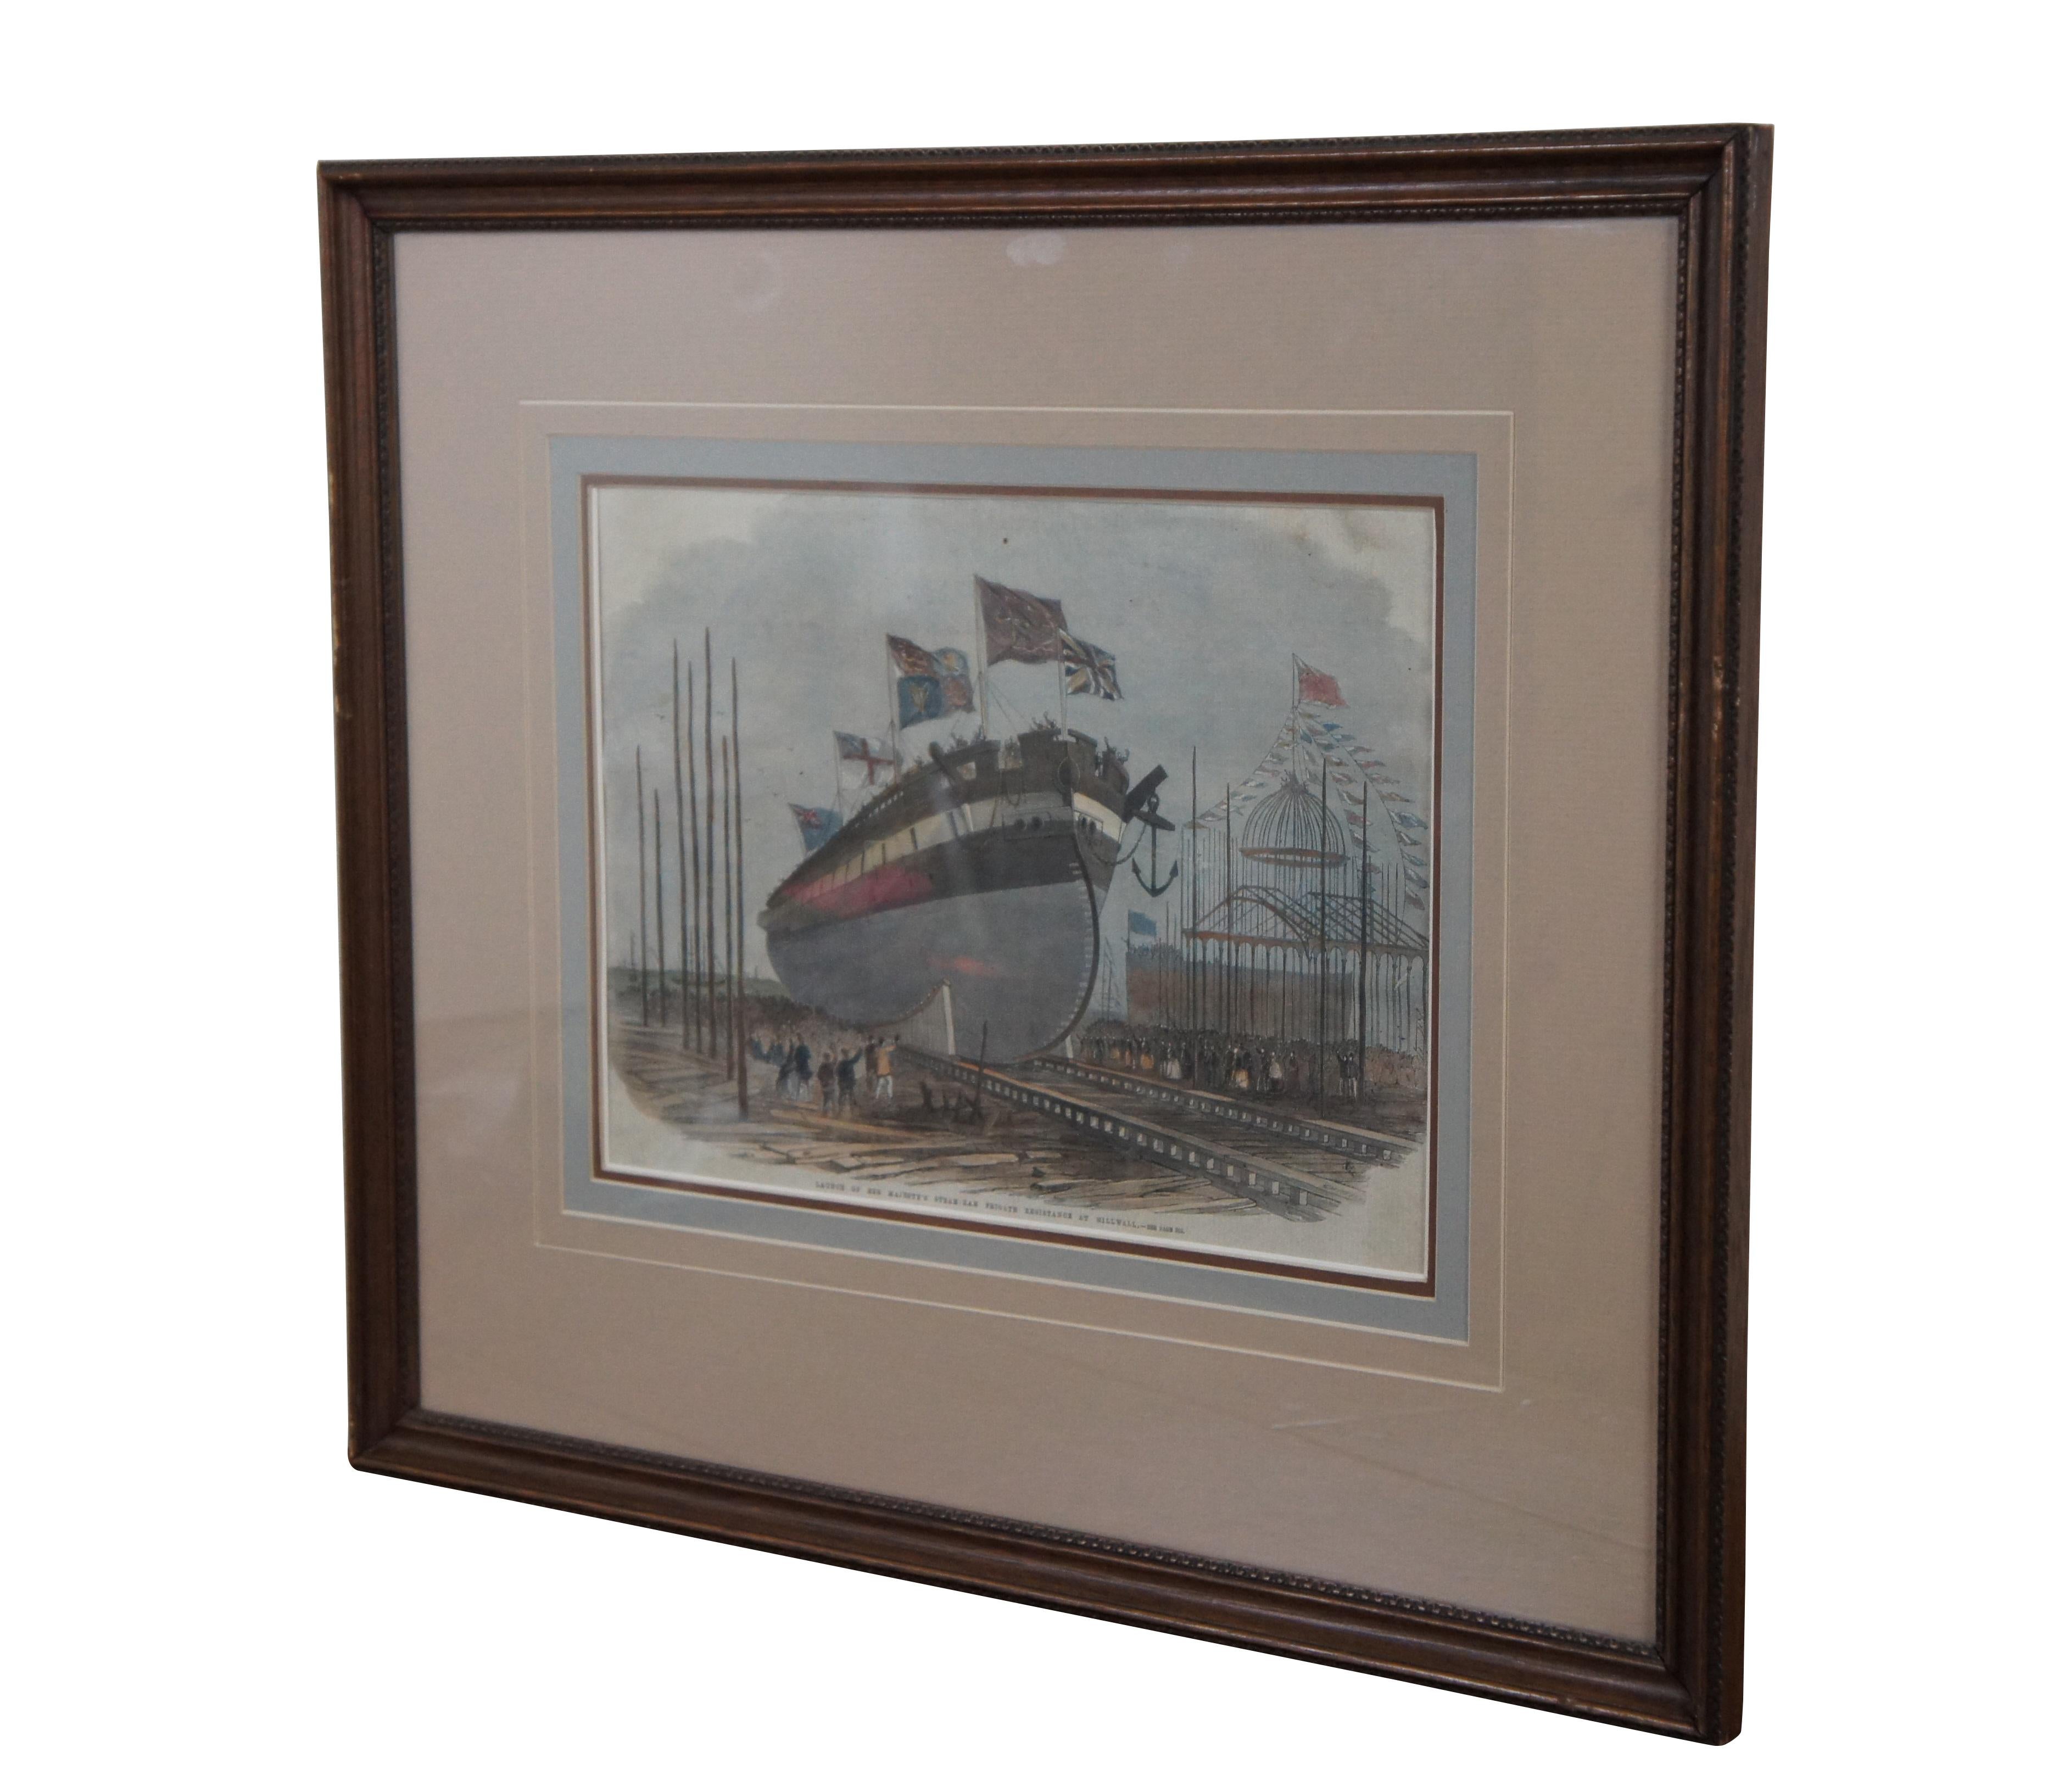 Mid 19th century hand colored nautical maritime boat engraving depicting “Launch of Her Majesty’s Steam-Ram Frigate Resistance at Millwall,” by Edwin Wheedeon , extracted from The Illustrated London News 1861. Features a wood frame with carved